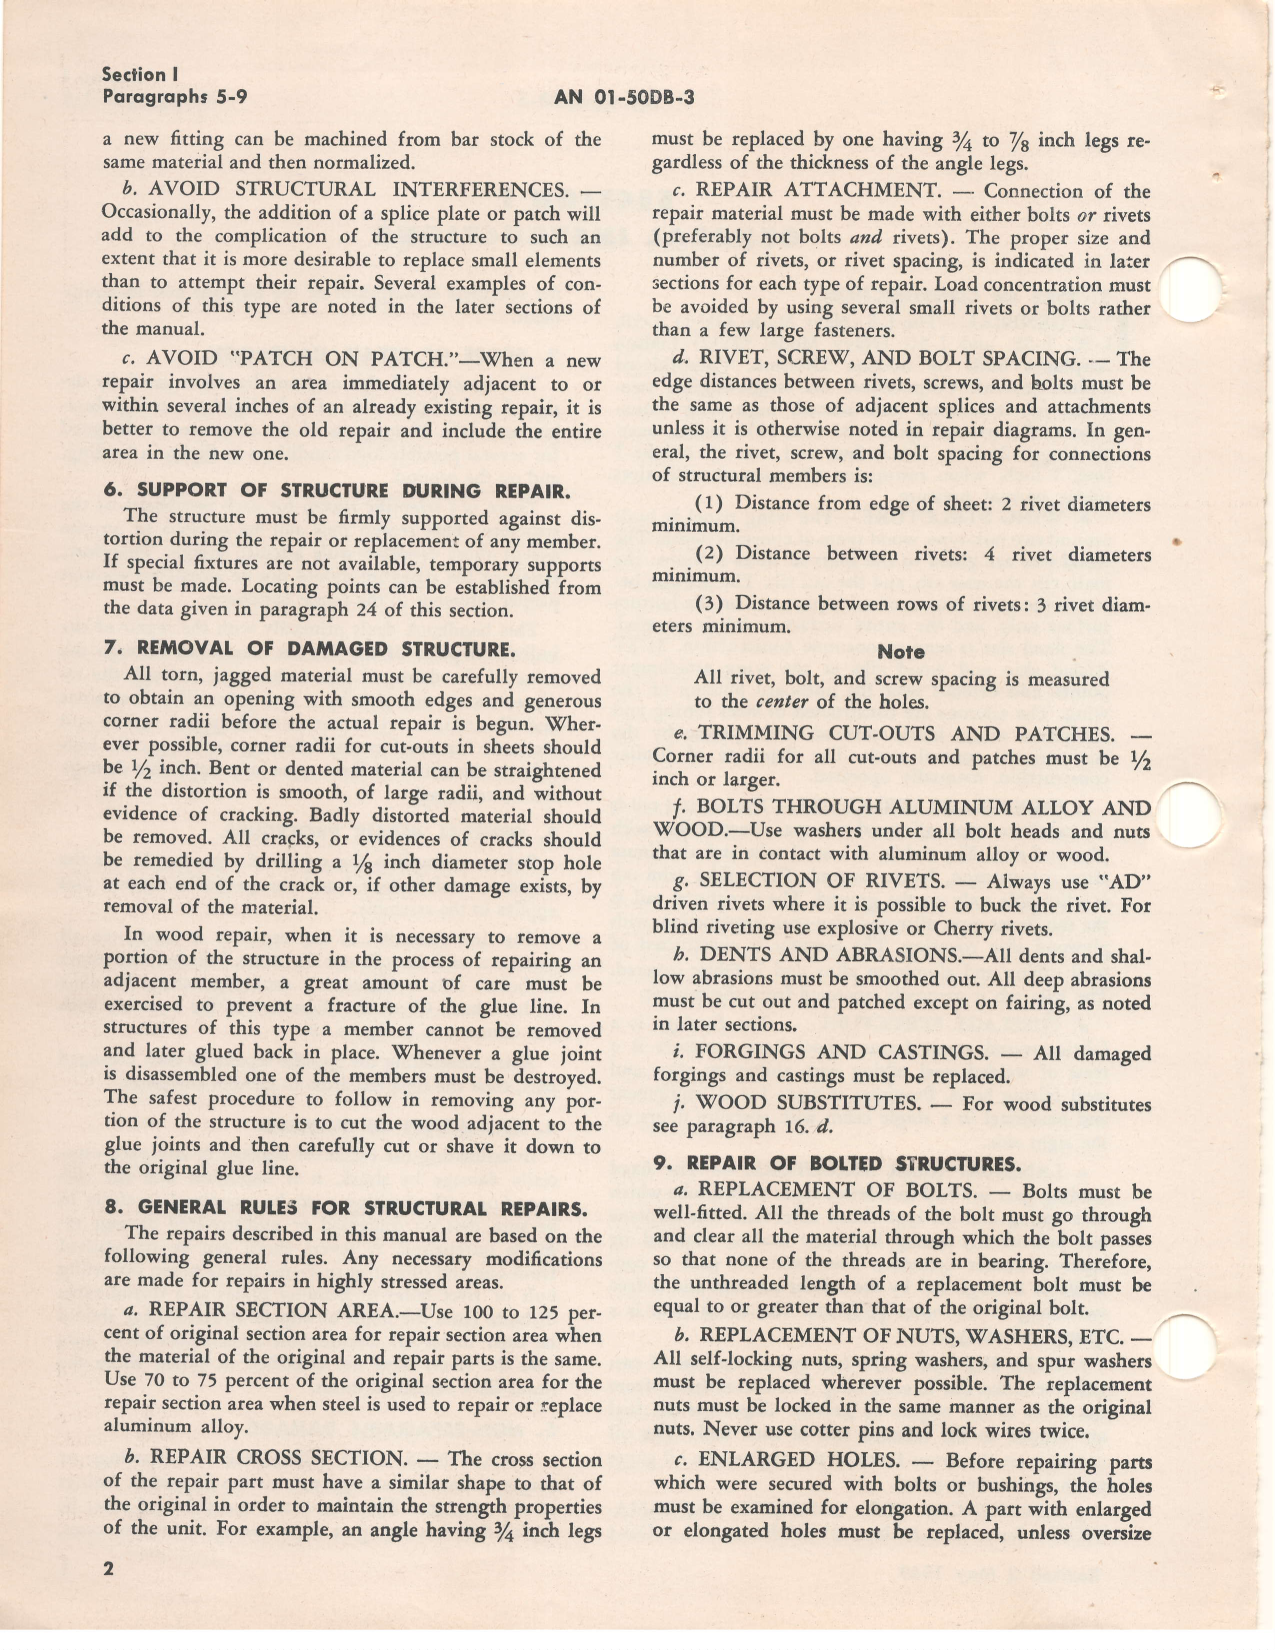 Sample page 8 from AirCorps Library document: Structural Repair Instructions - L-5 OY-1 OY-2